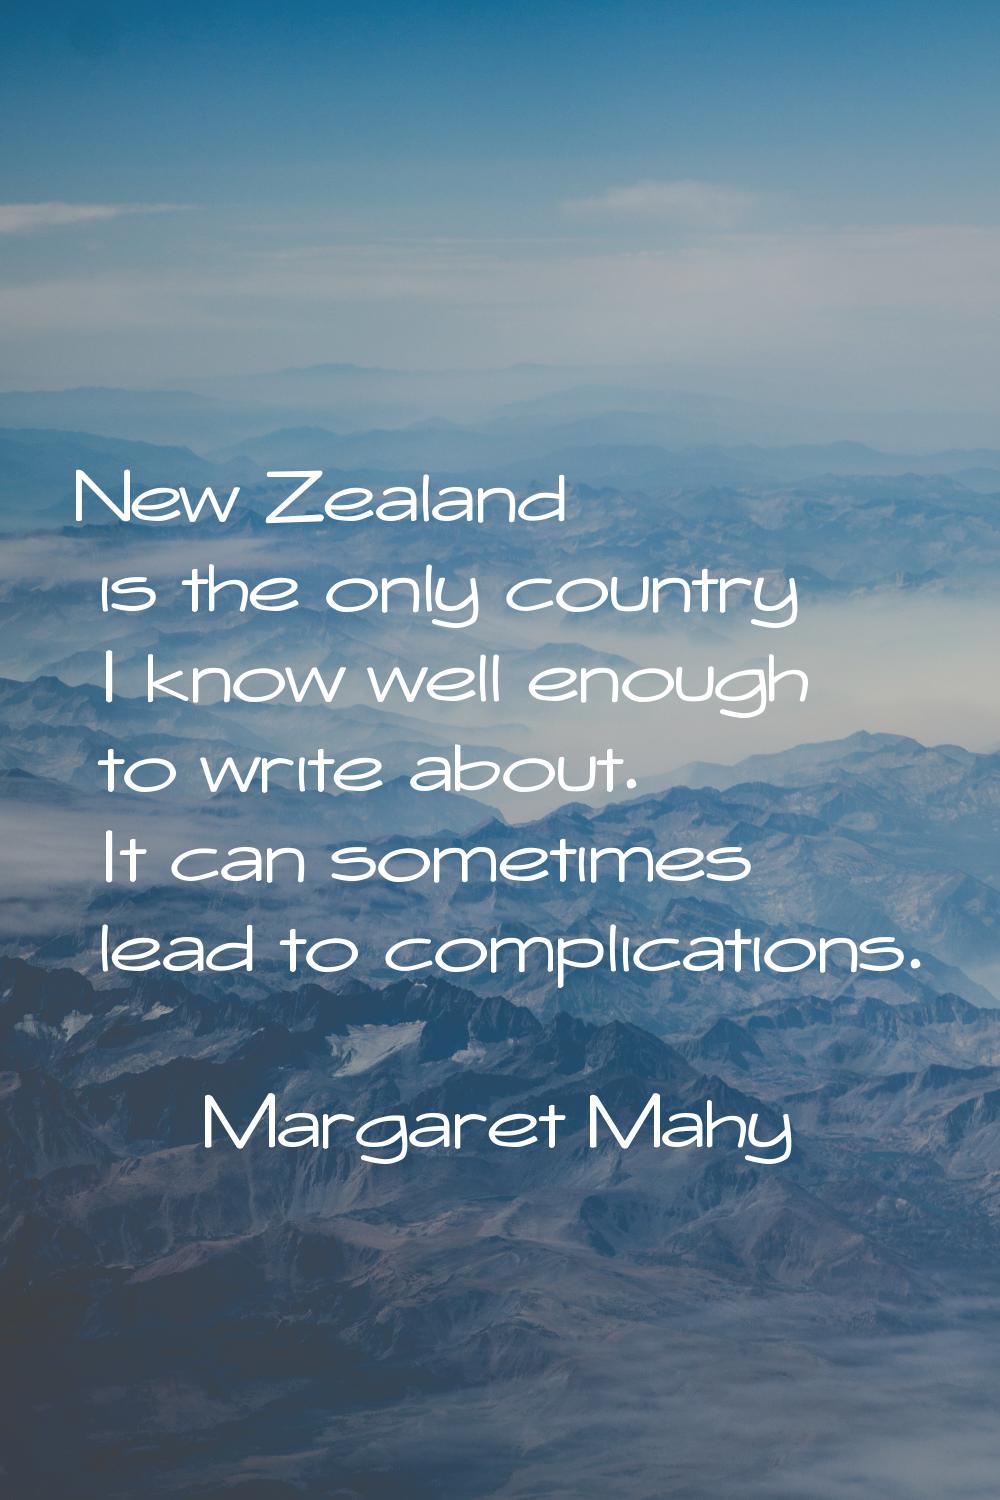 New Zealand is the only country I know well enough to write about. It can sometimes lead to complic